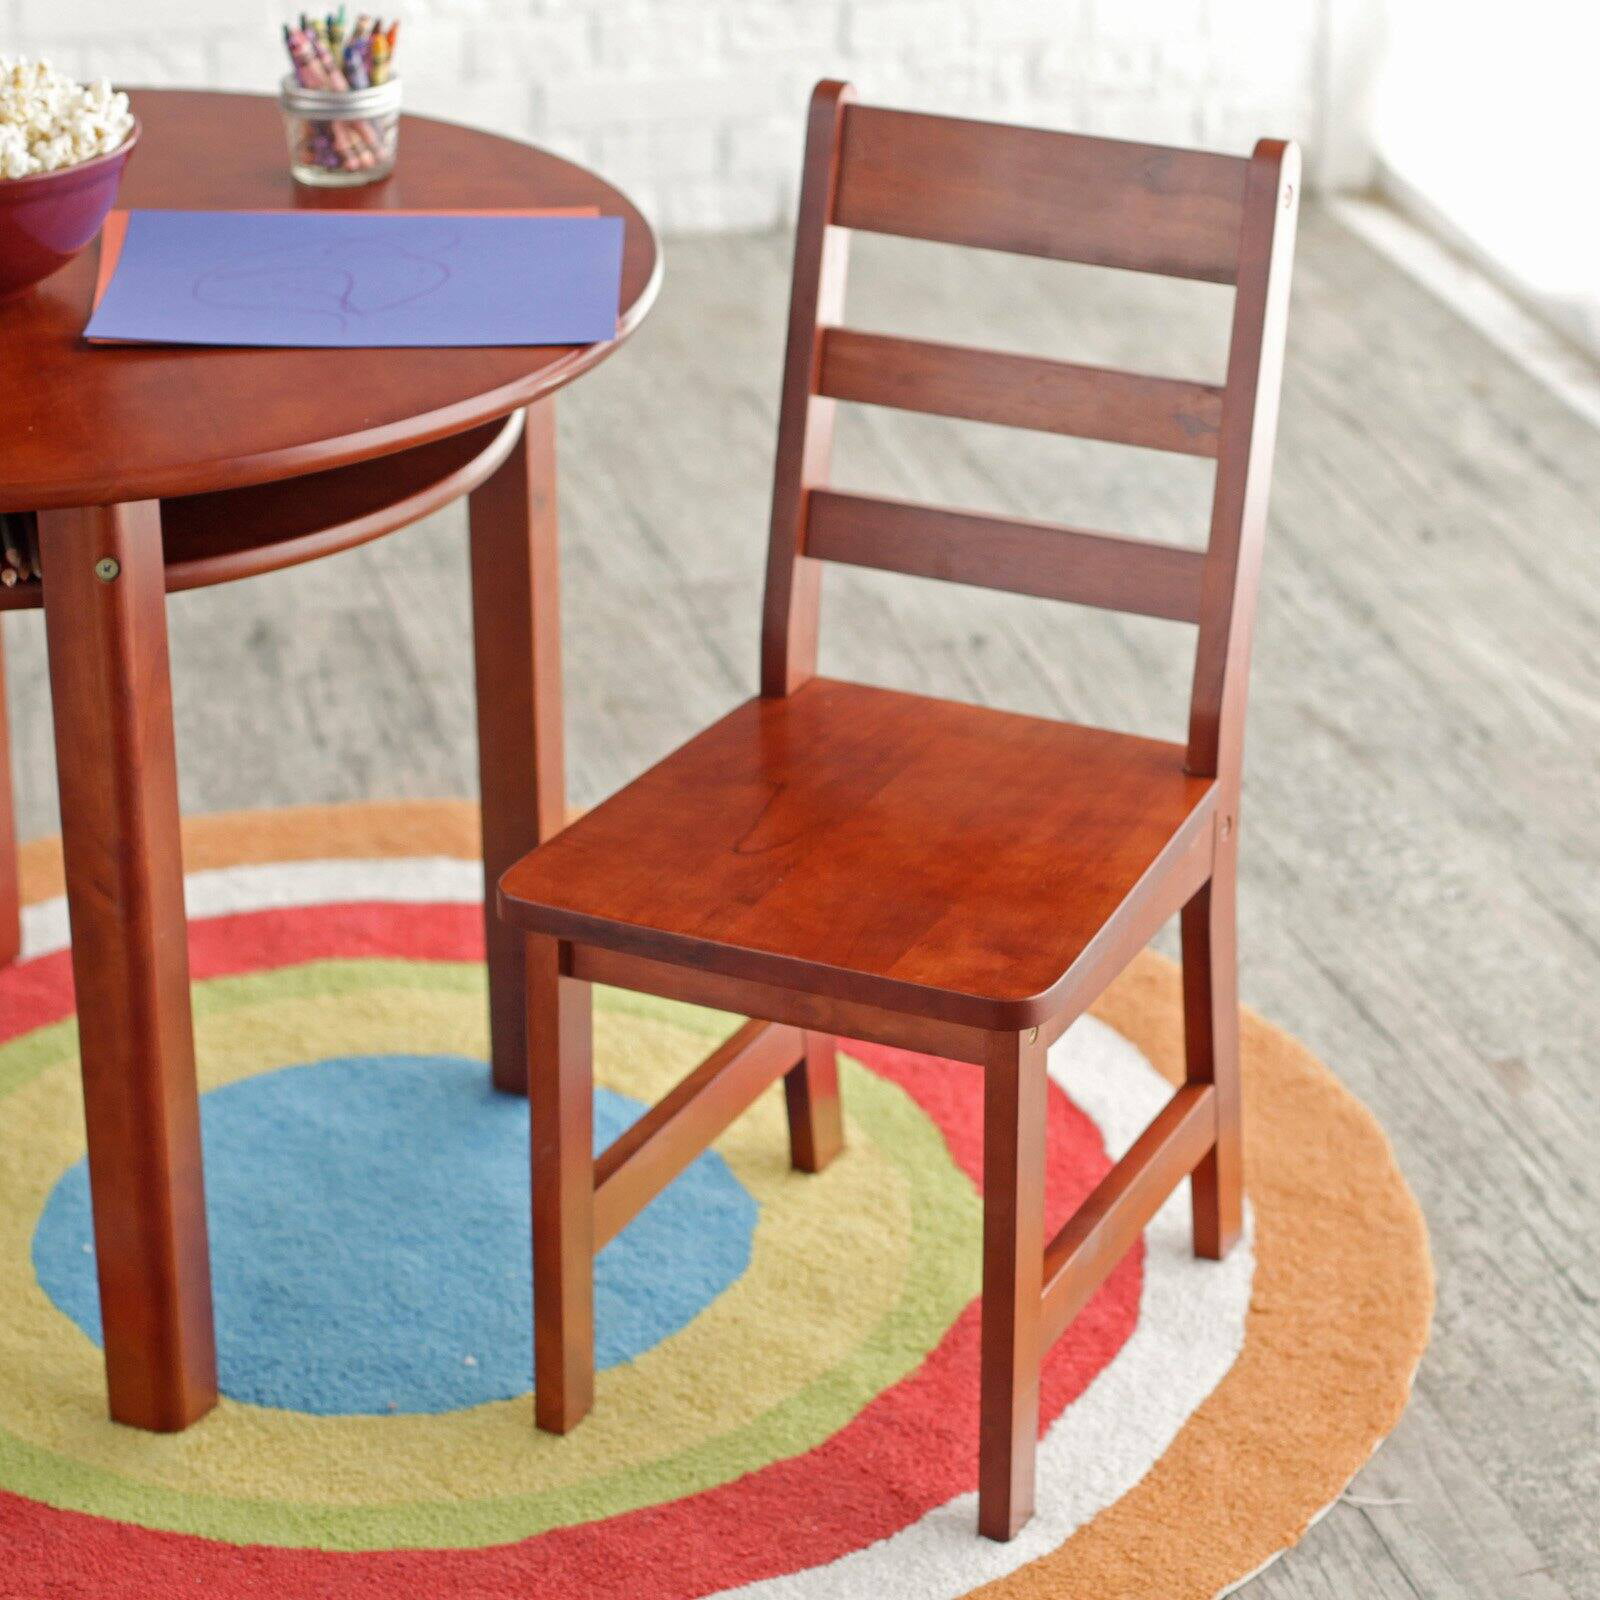 Lipper International Childs Round Table with Shelf and 2 Chairs Cherry Finish 